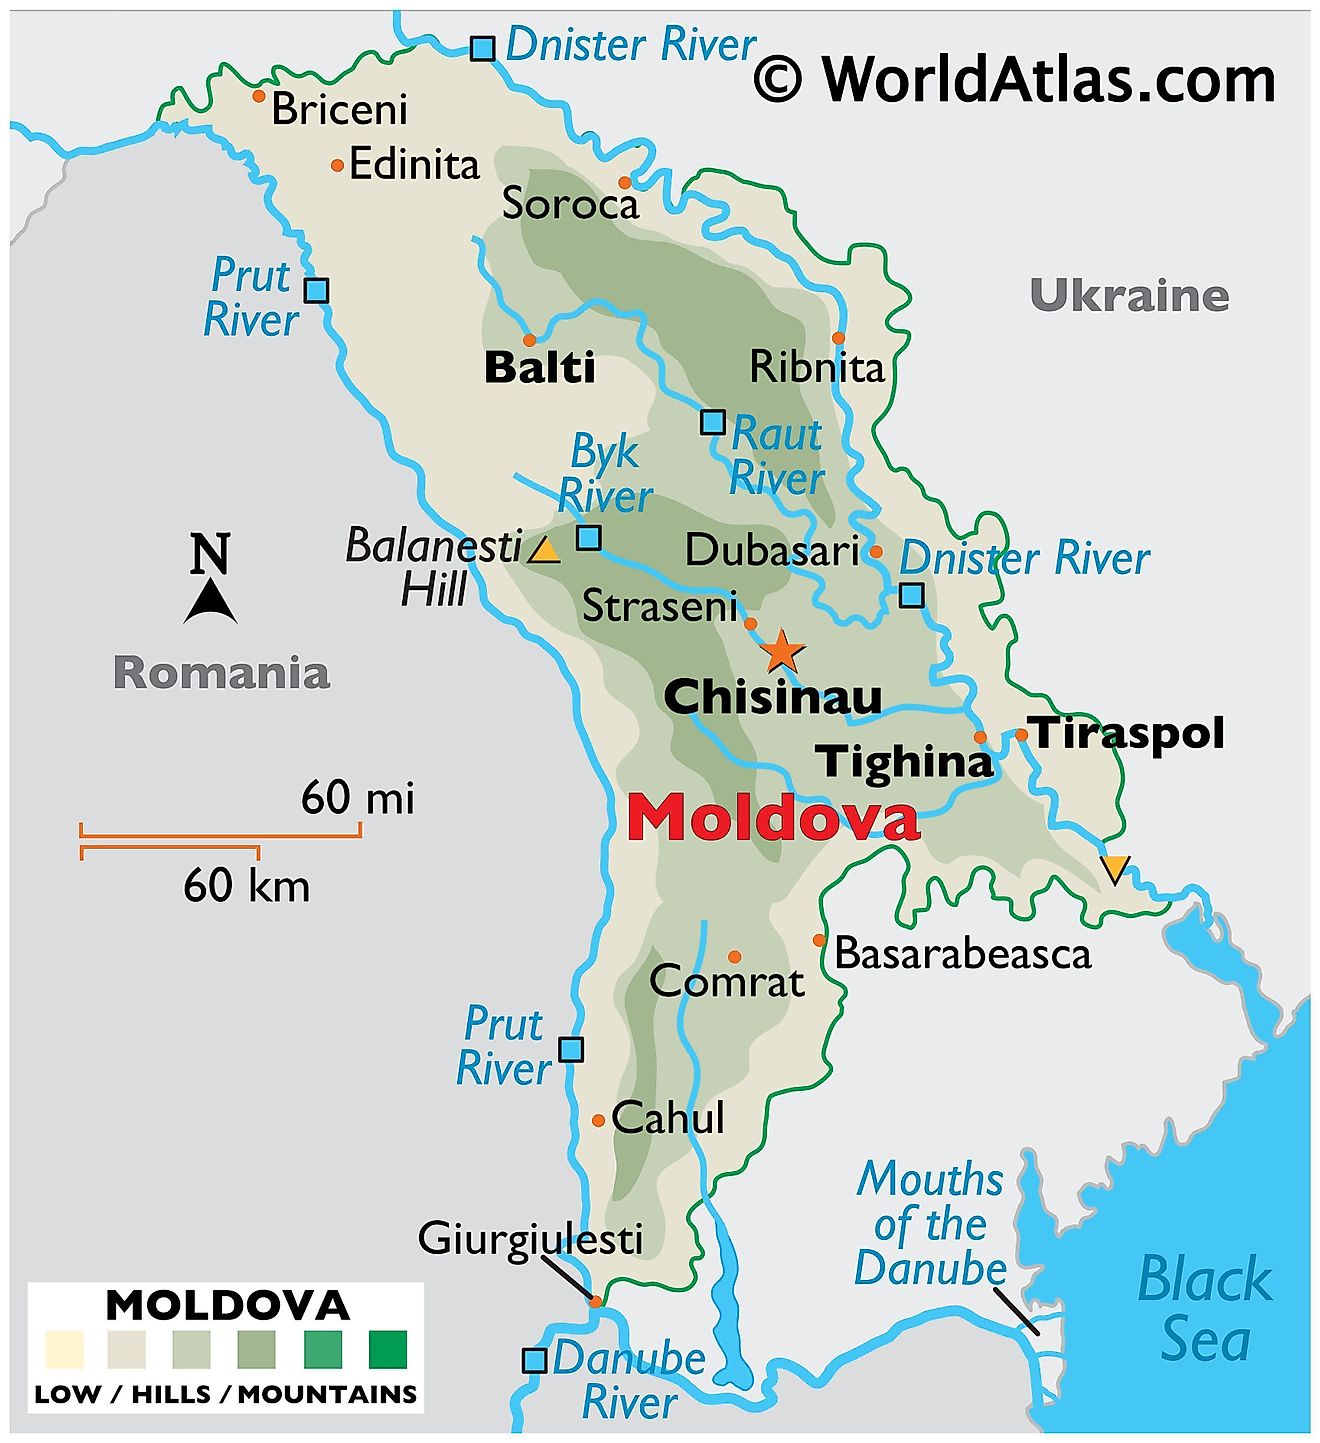 Physical Map of Moldova showing terrain, highest and lowest points, major rivers draining the country, important cities, international boundaries, etc.